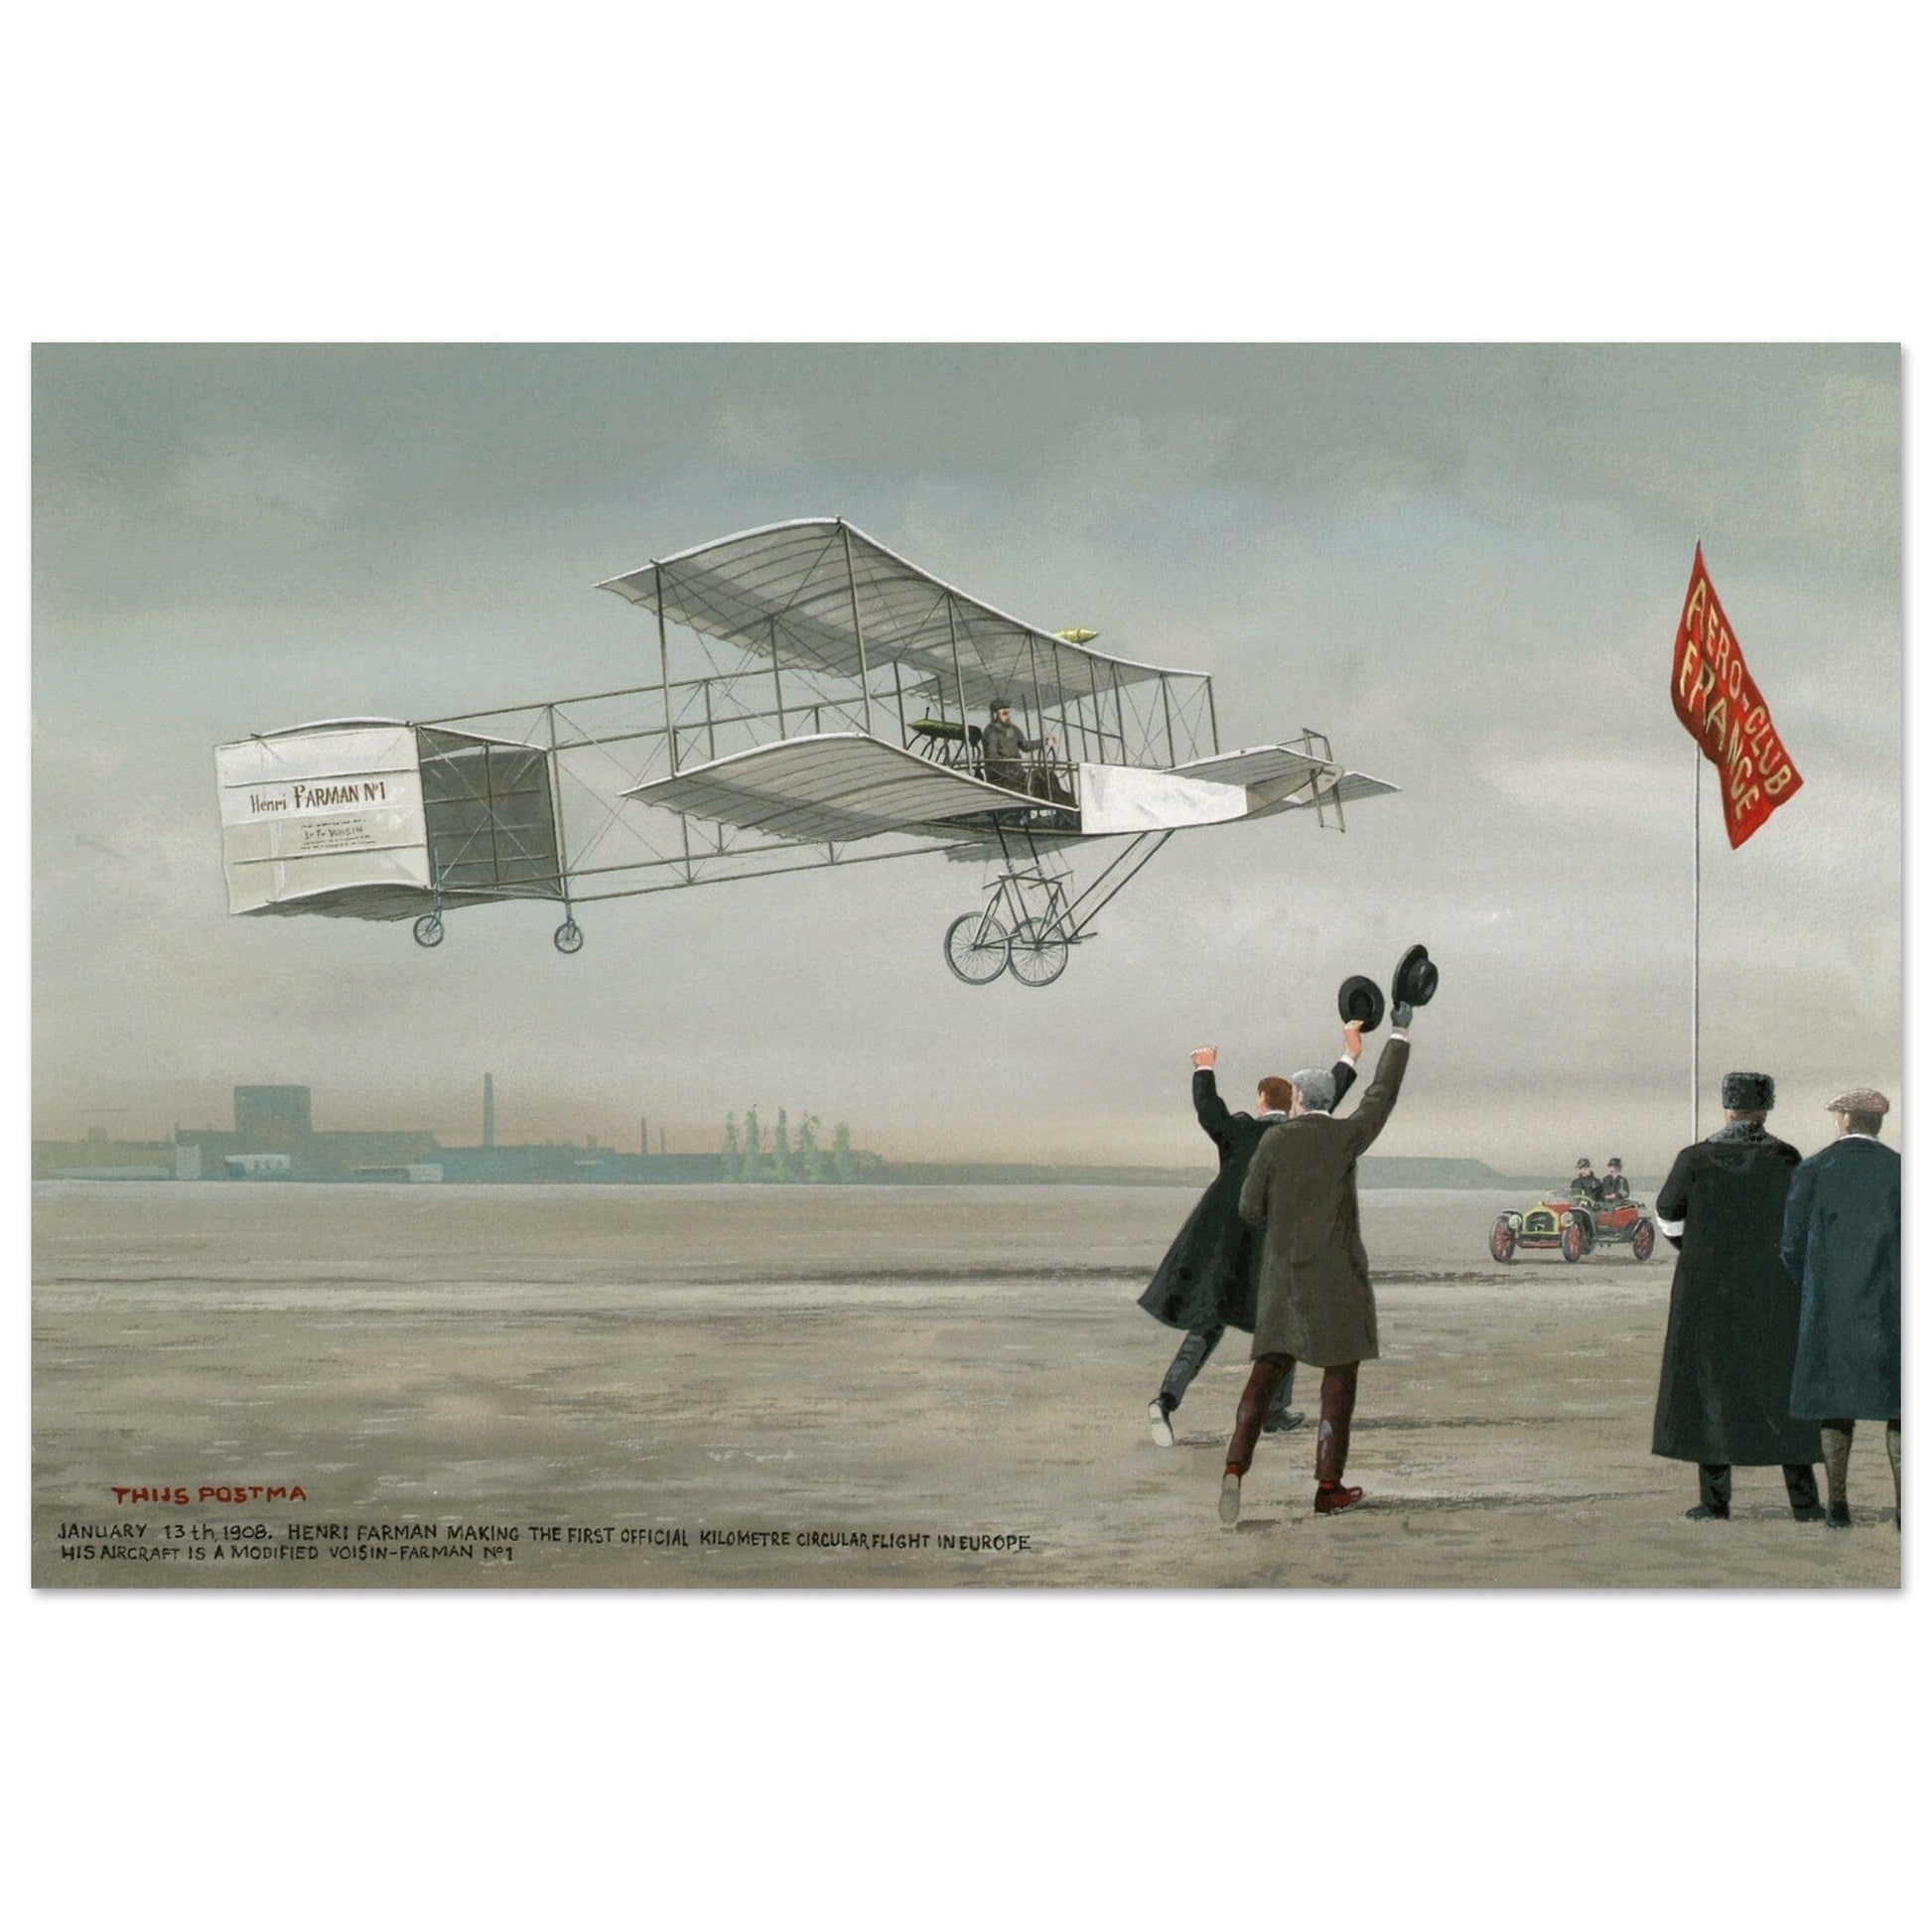 Thijs Postma - Poster - Farman No.1 First Flight Of One Kilometer Over Europe Poster Only TP Aviation Art 40x60 cm / 16x24″ 